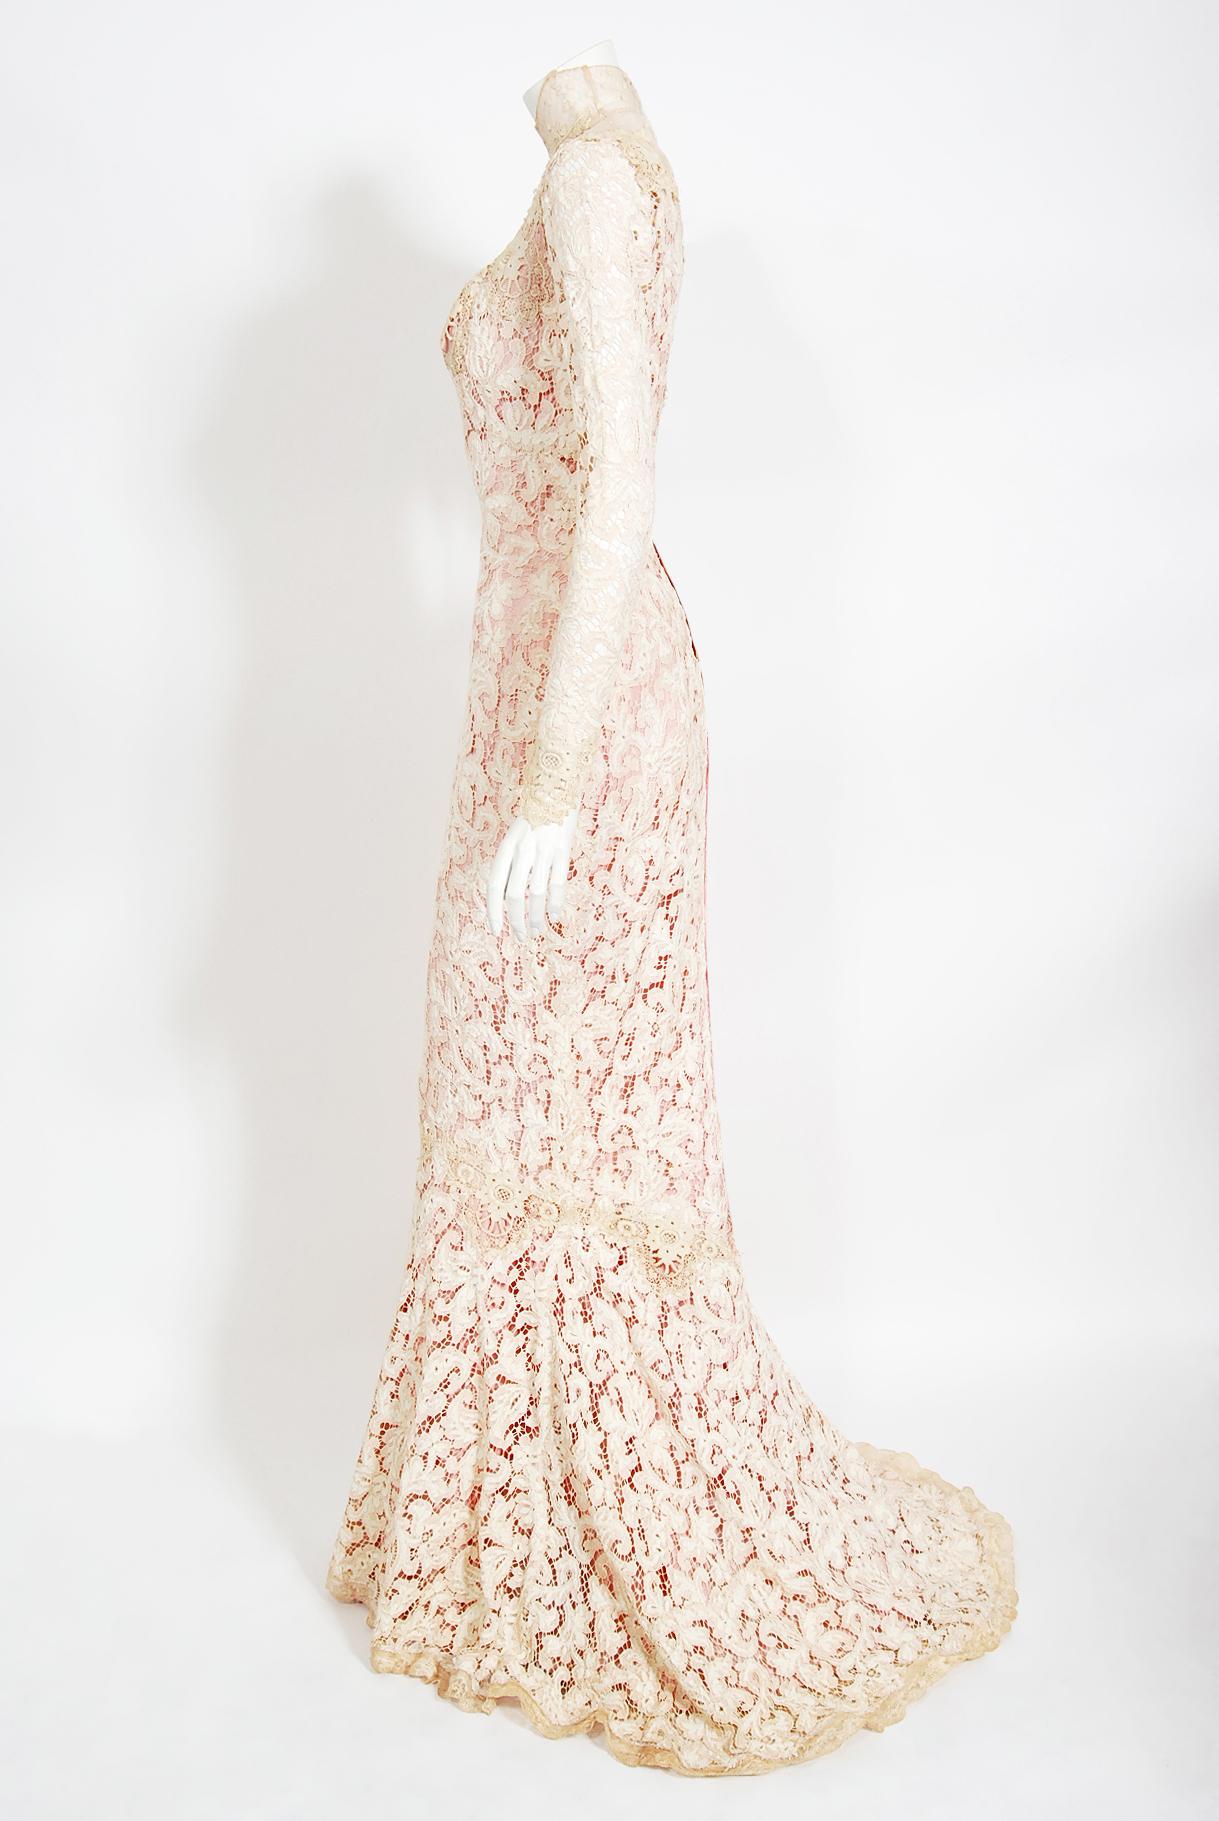 Women's Iconic 1969 Gypsy Rose Lee Custom Couture Ivory Lace & Pink Silk Victorian Gown